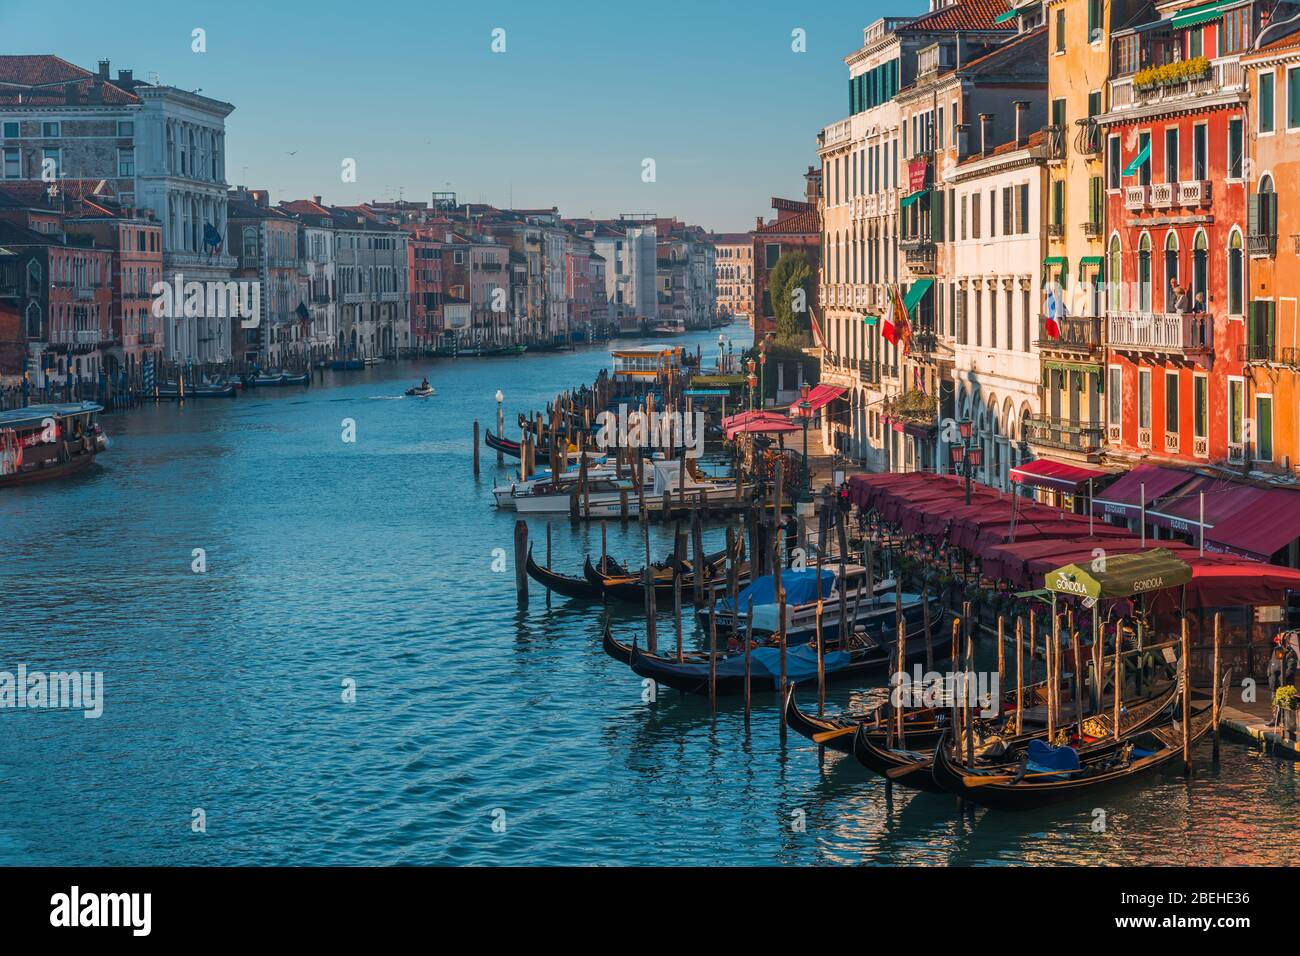 VENICE, VENETO / ITALY - DECEMBER 26 2019: Venice view from the top before COVID-19 pandemic Stock Photo